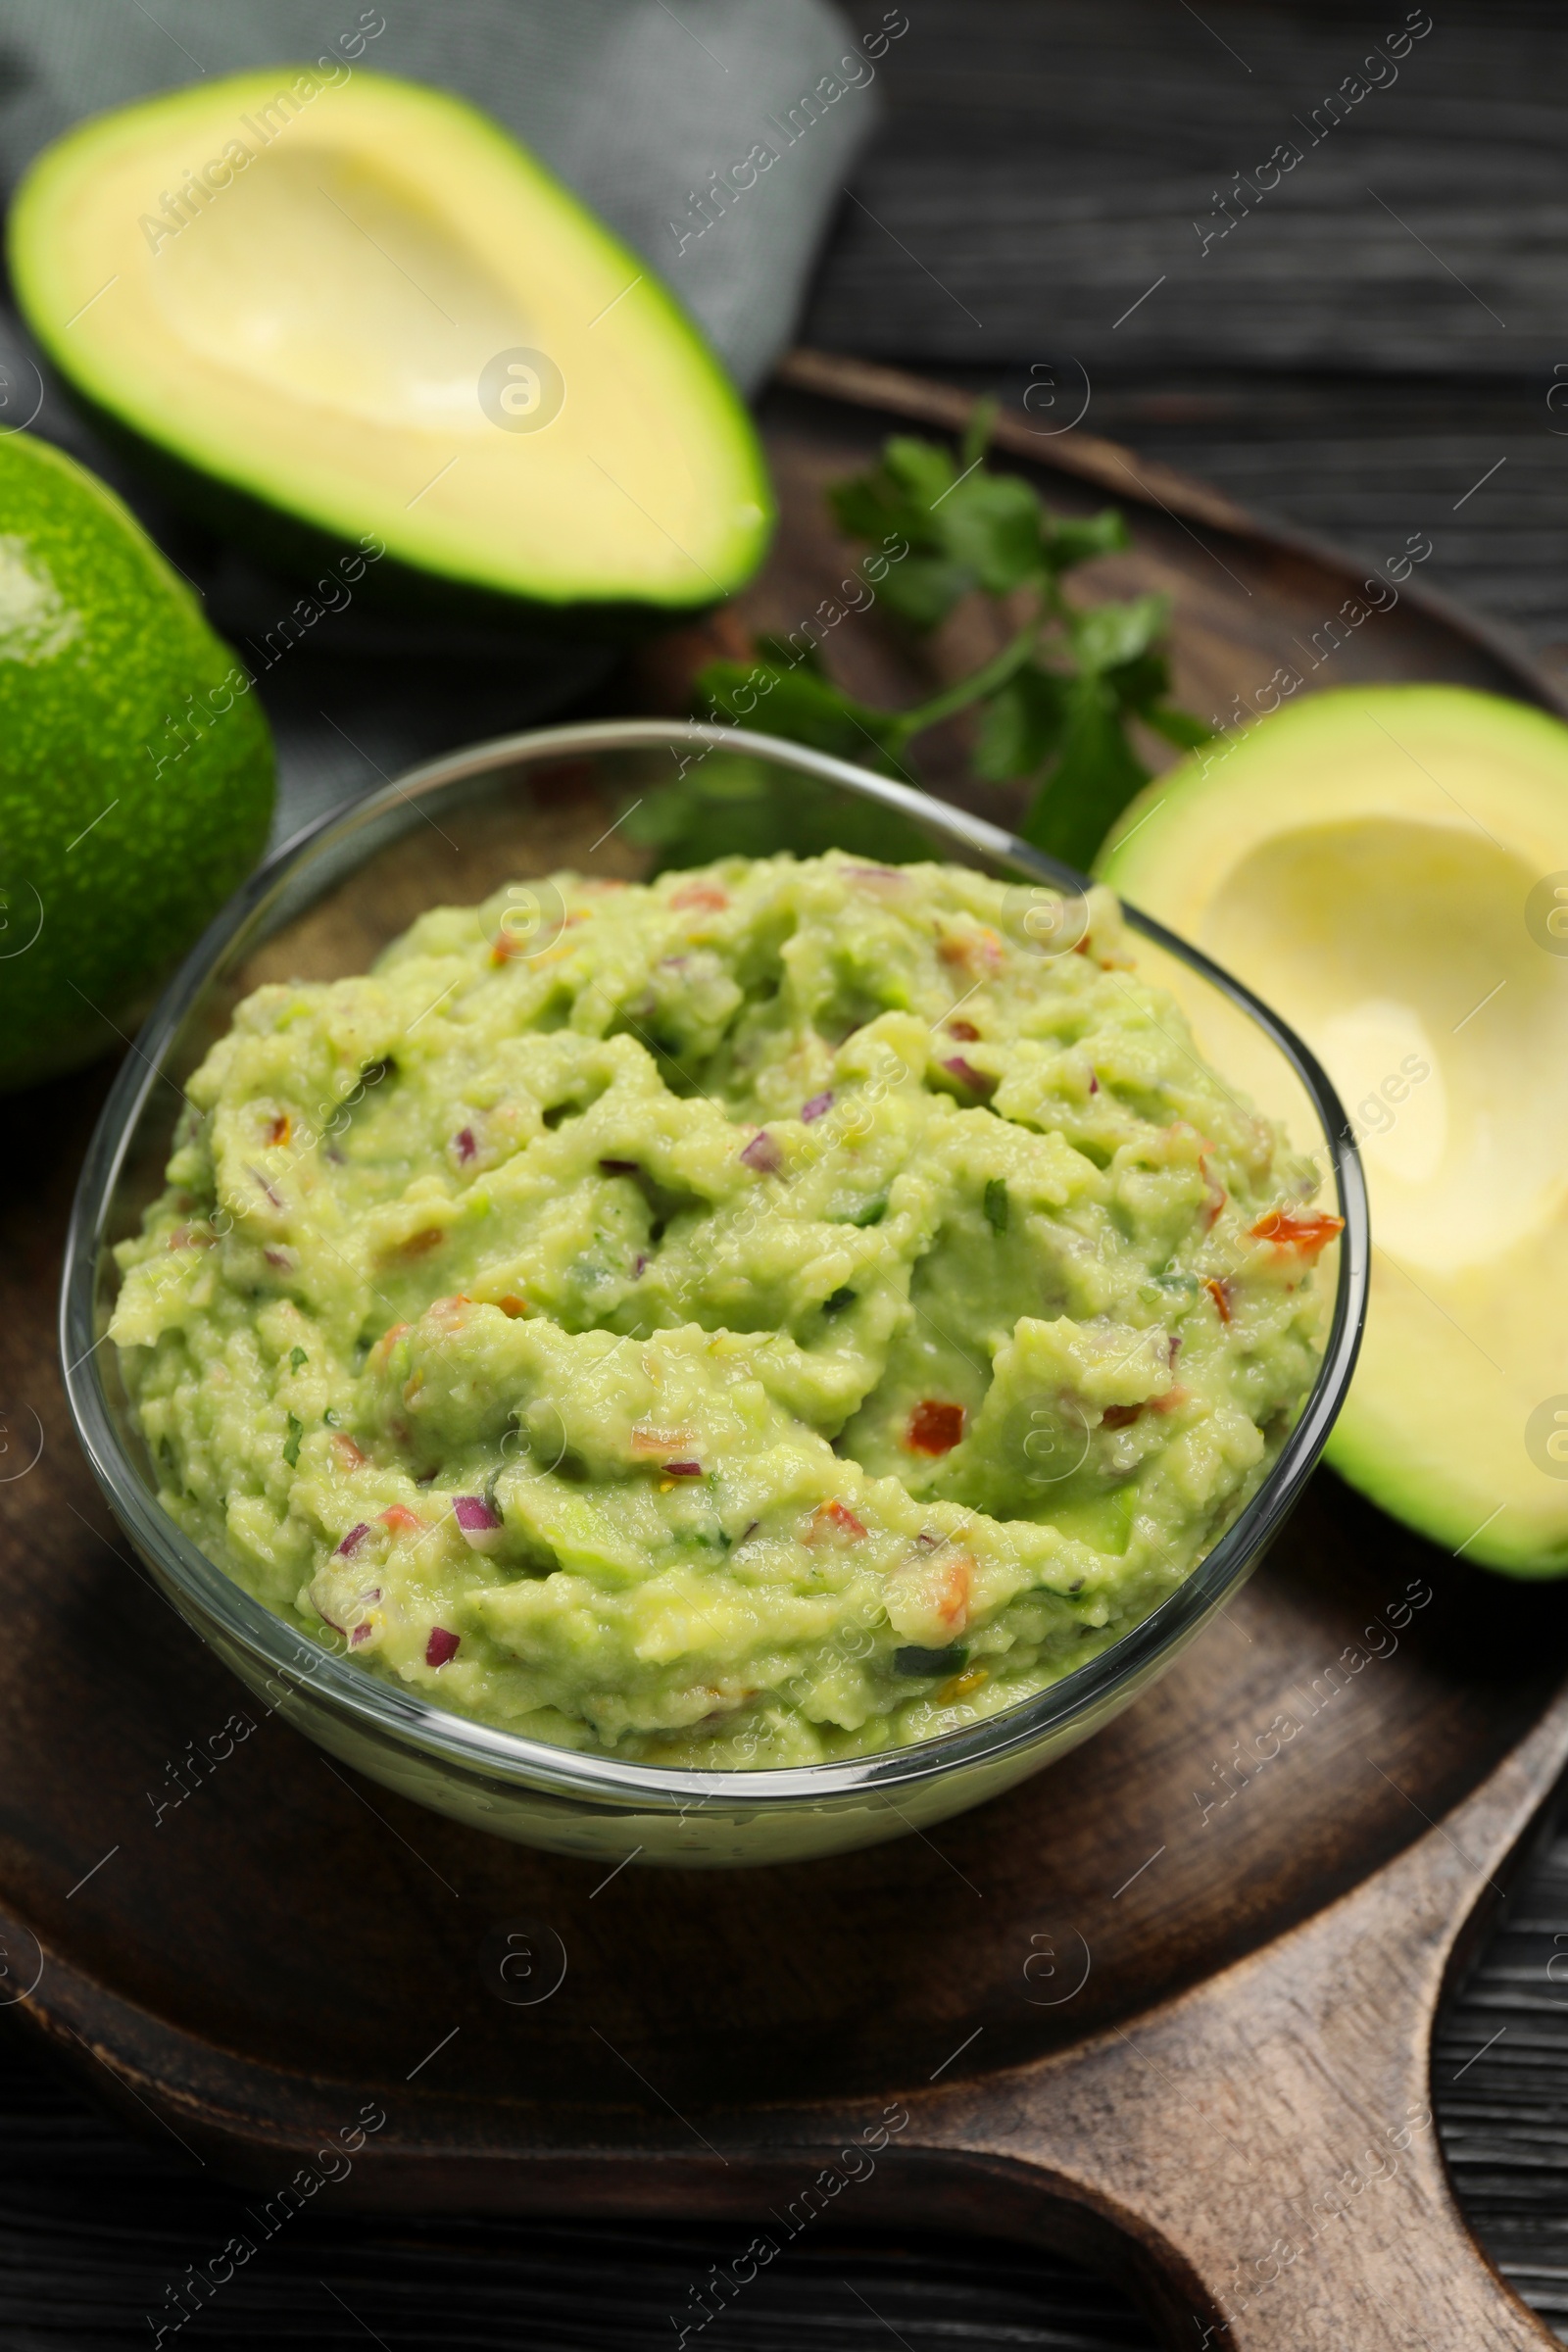 Photo of Delicious guacamole with parsley and fresh avocado on wooden board